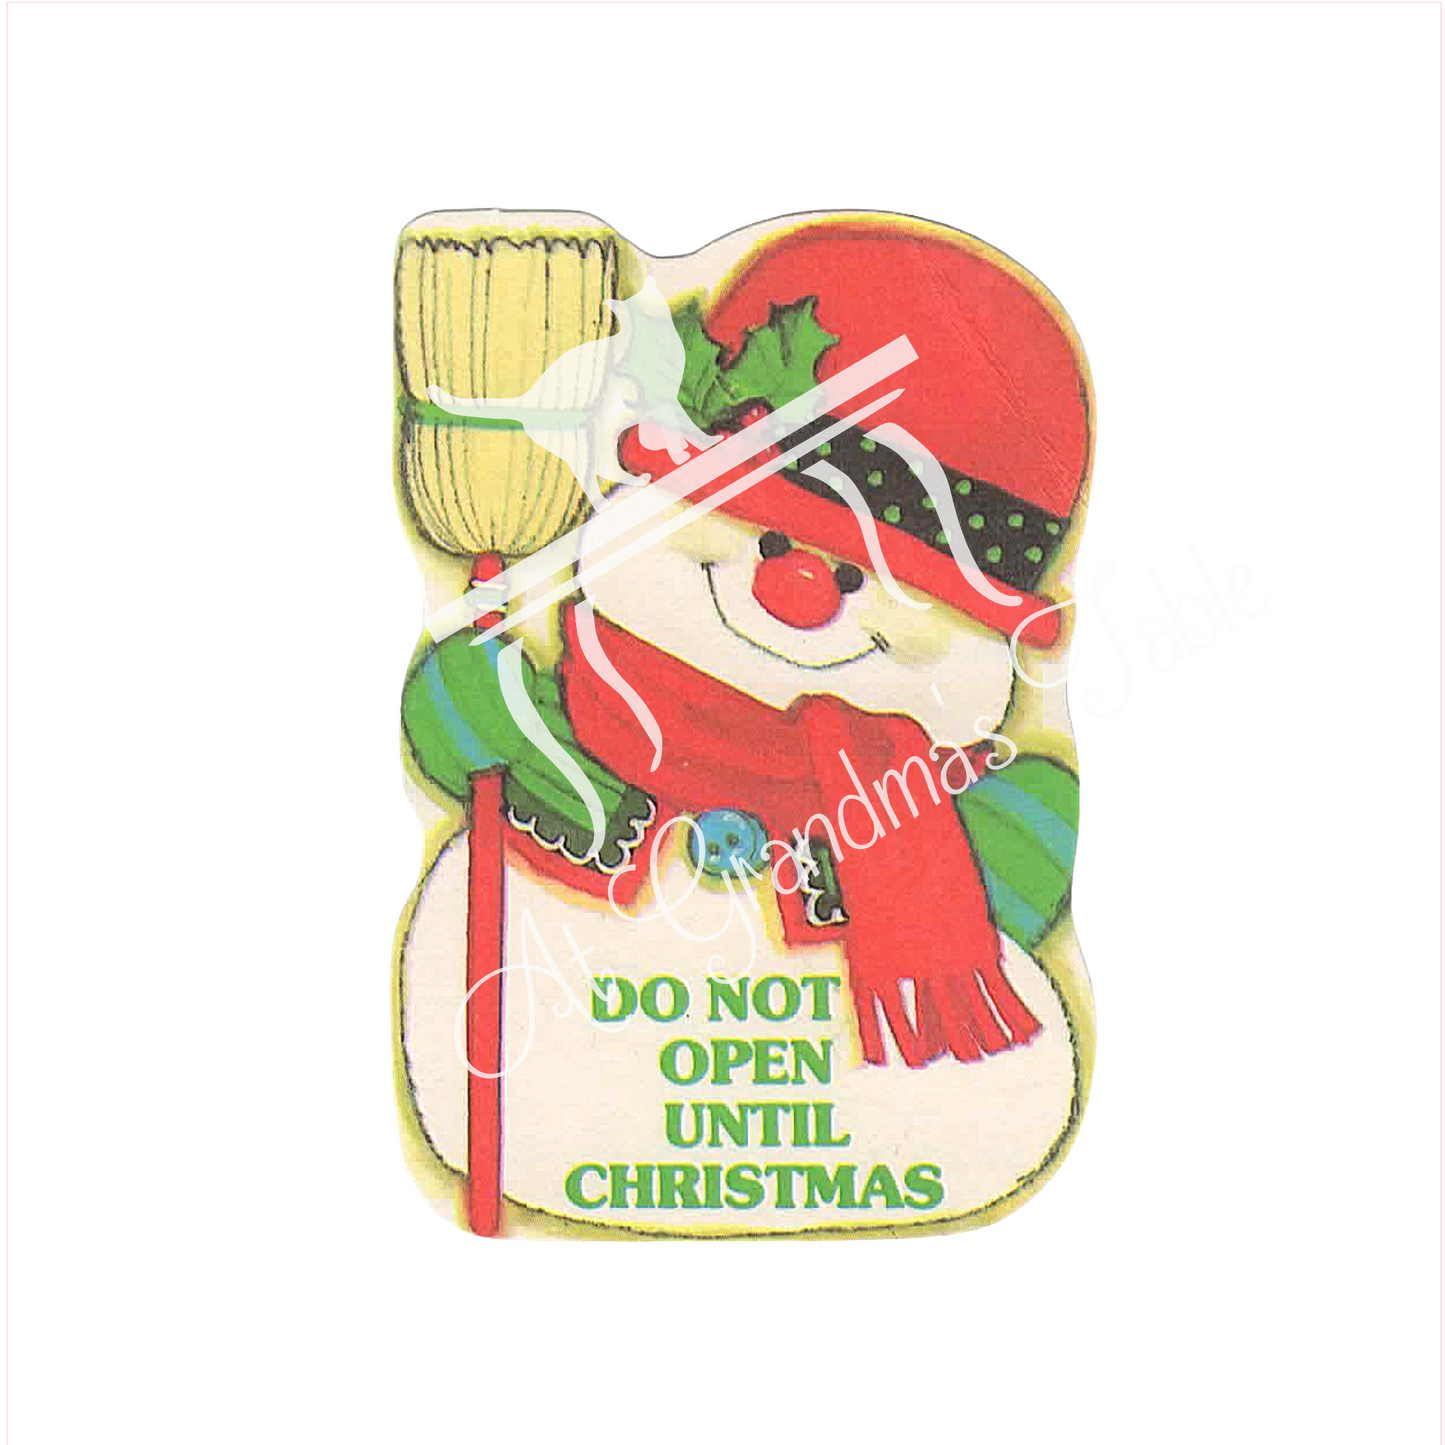 Vintage Snowman with Broom and Red Hat Graphic Do Not Open Before Christmas Download Art Gift Tag